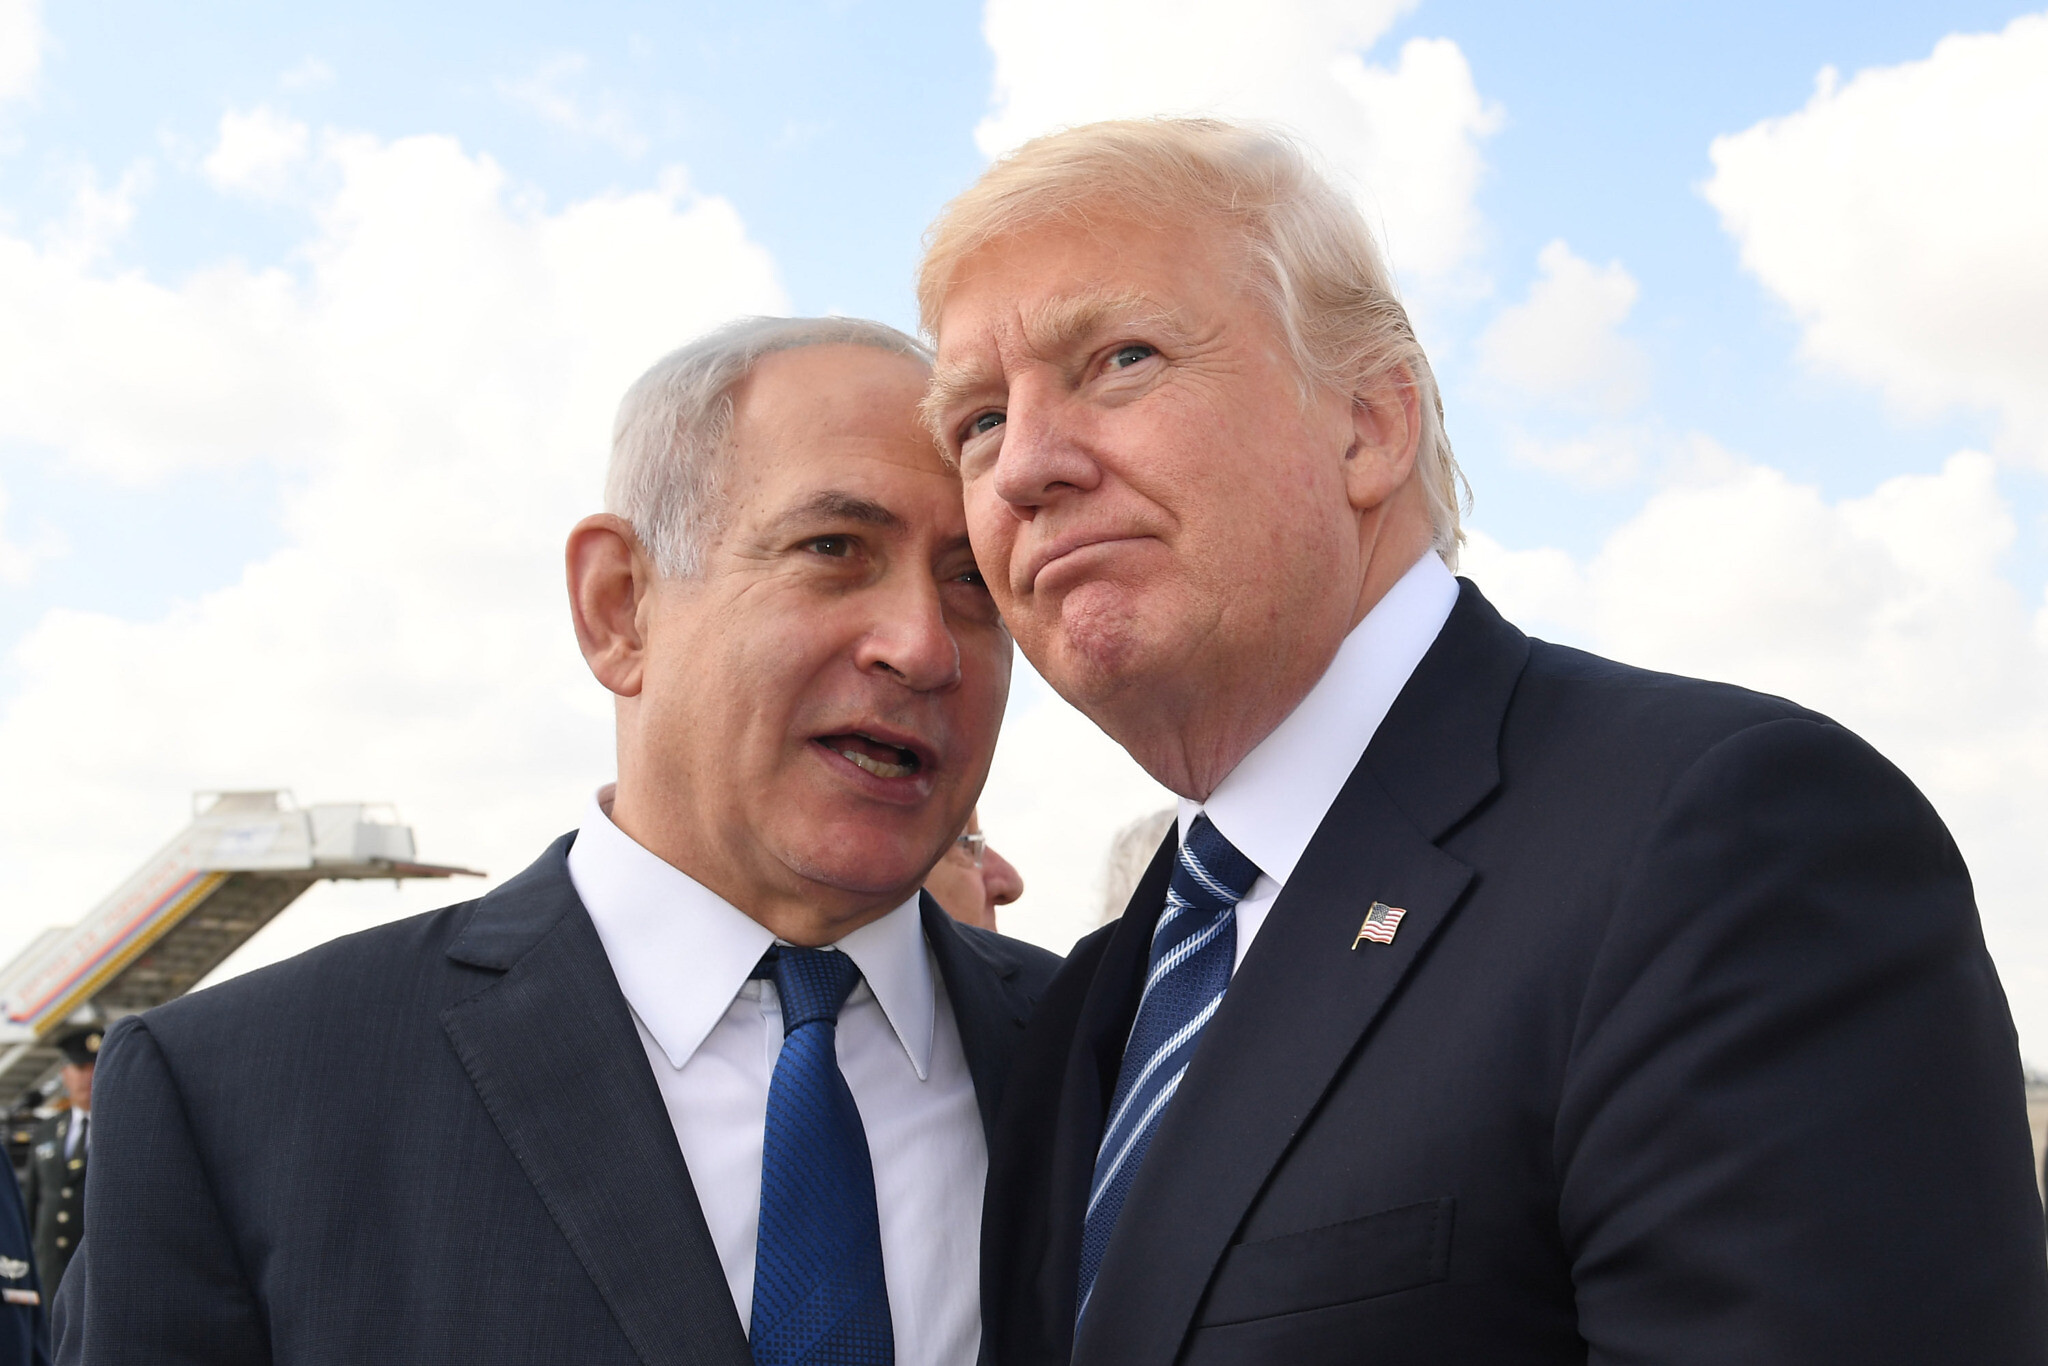 Netanyahu: Trump said I don't want peace, in a 'Houston, we are the problem!' moment | The Times of Israel